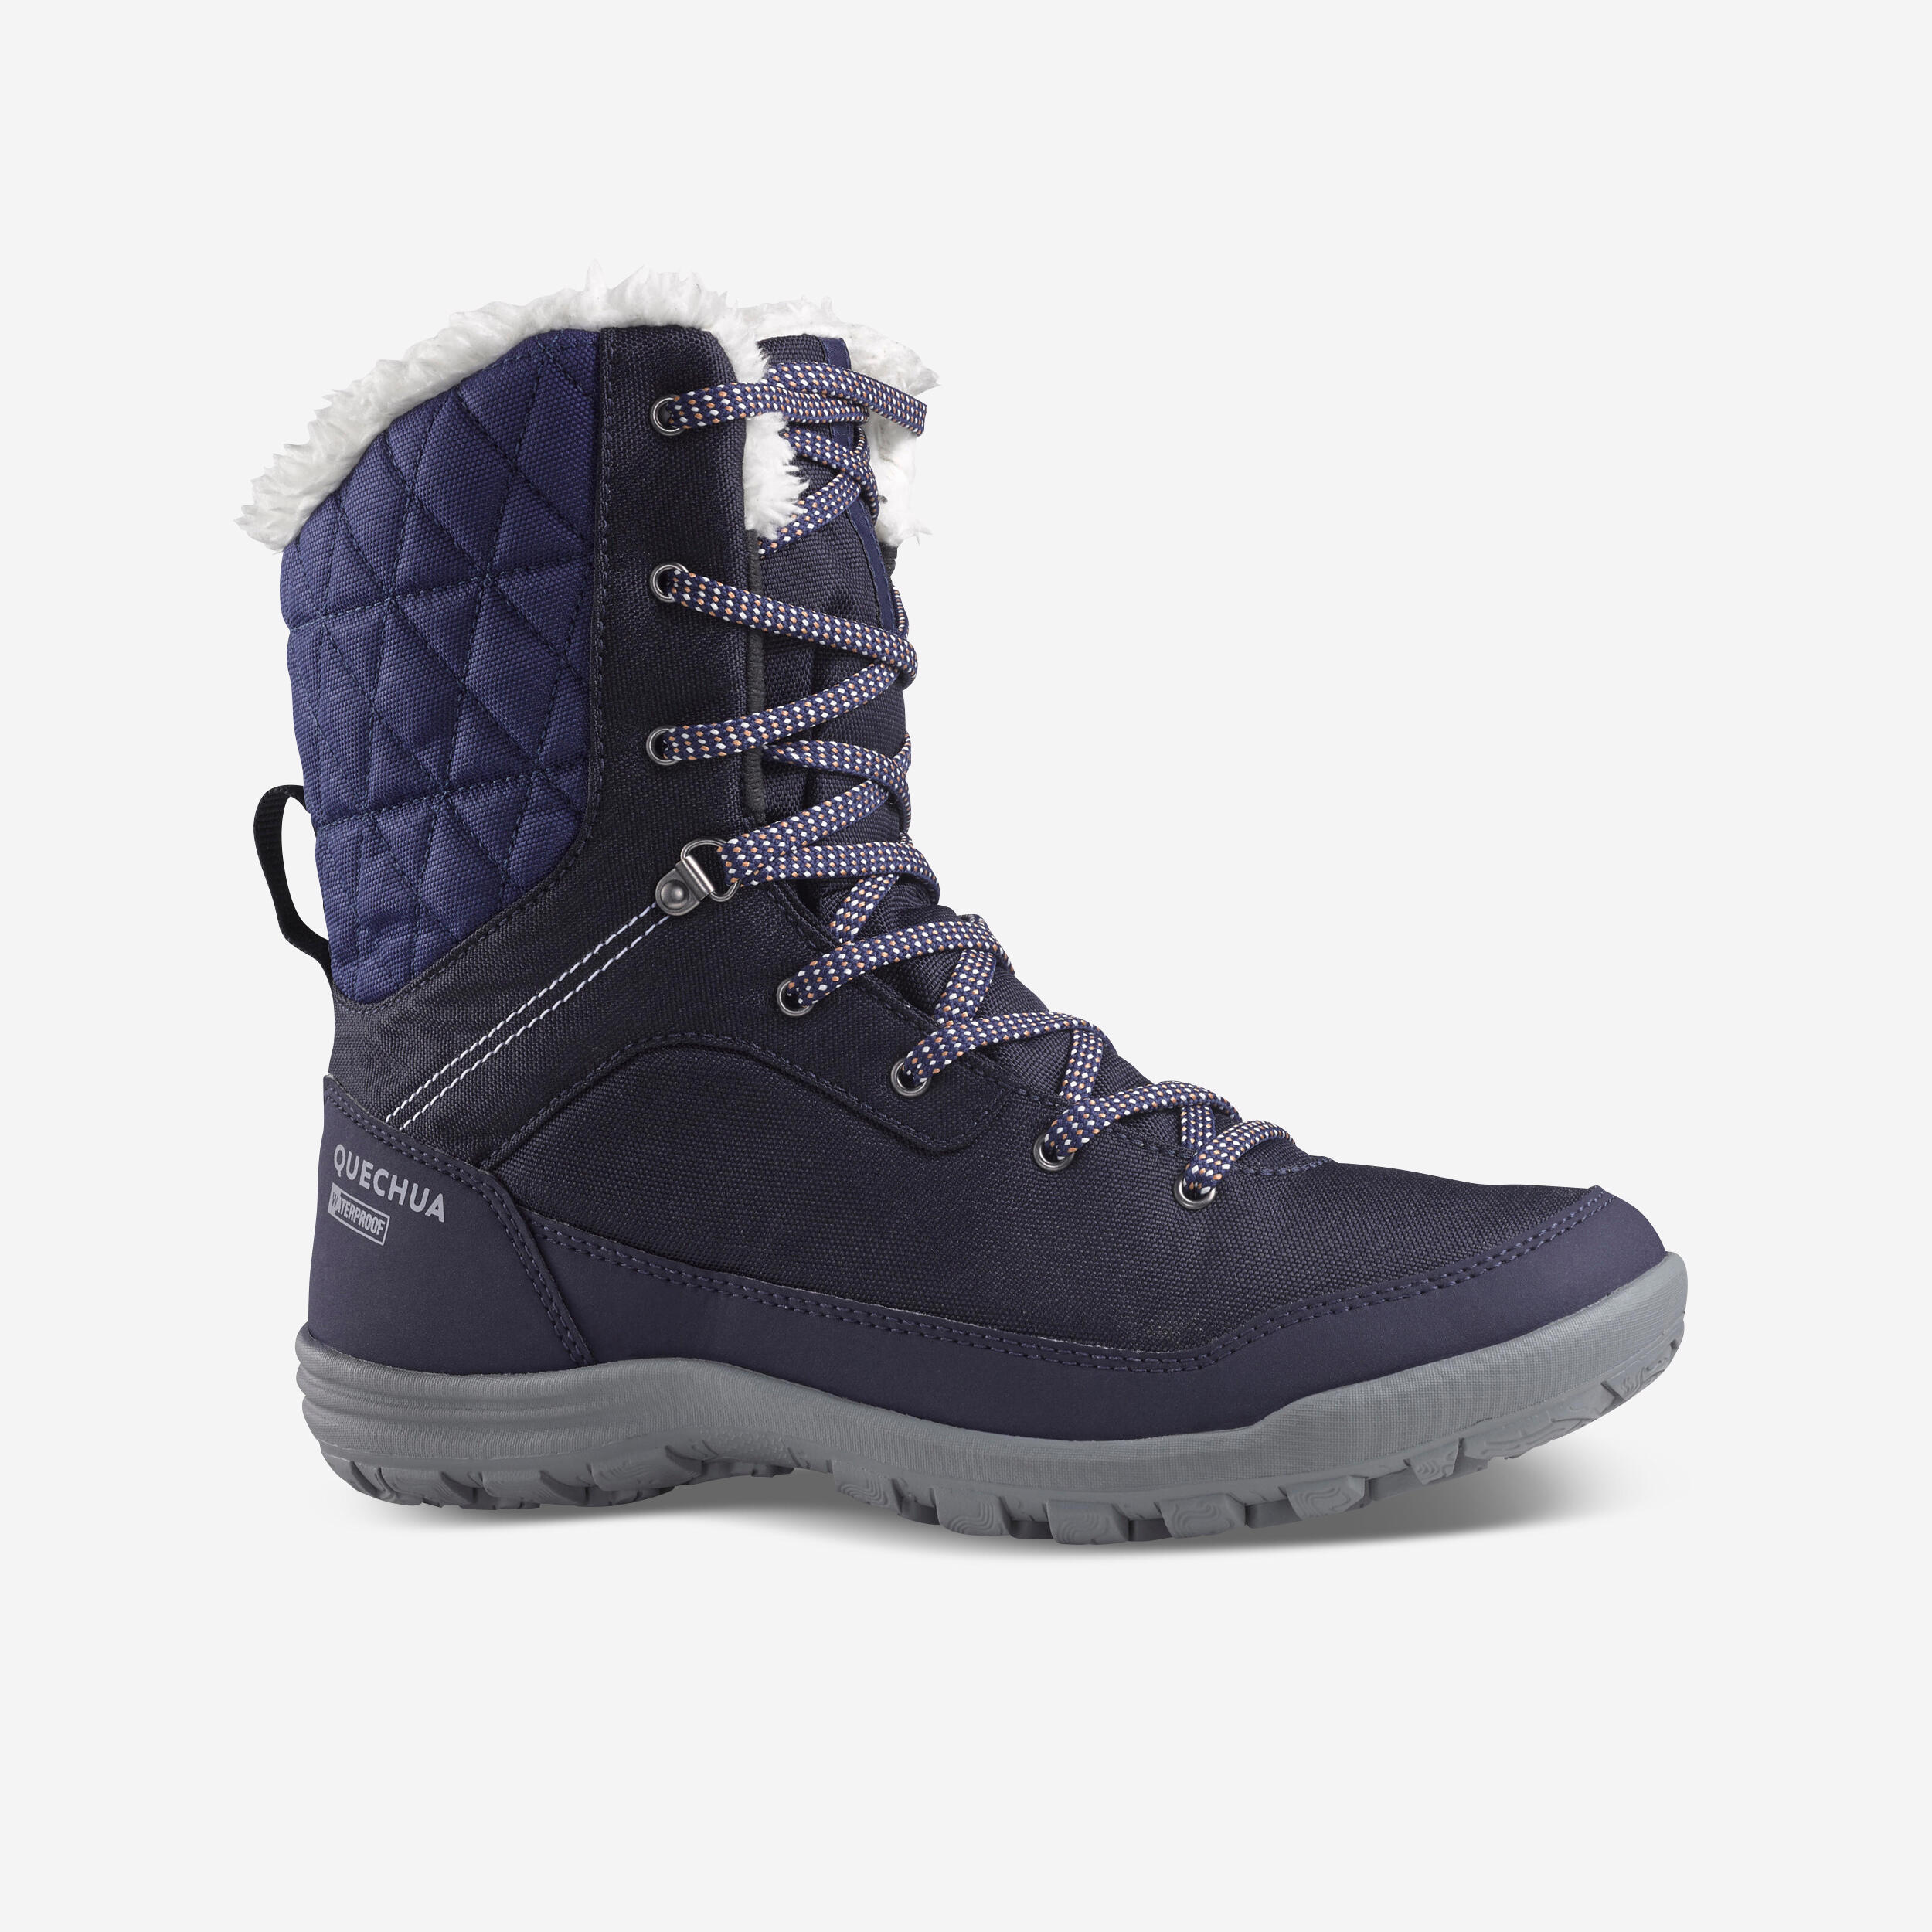 Image of Women’s Winter Boots - SH 100